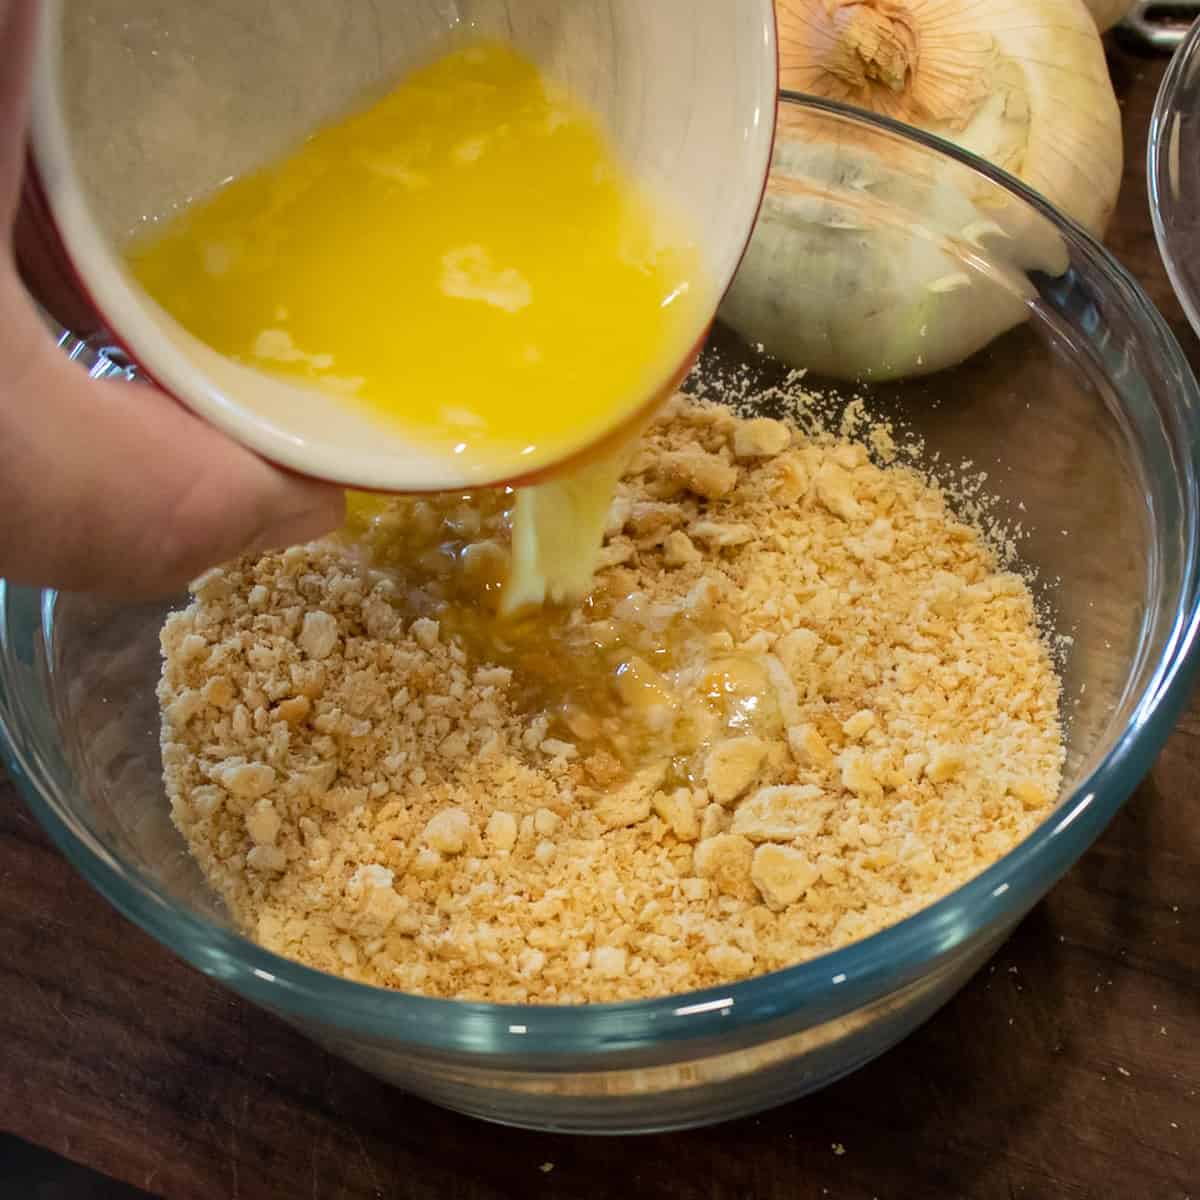 Pouring melted butter into a bowl with crushed crackers.